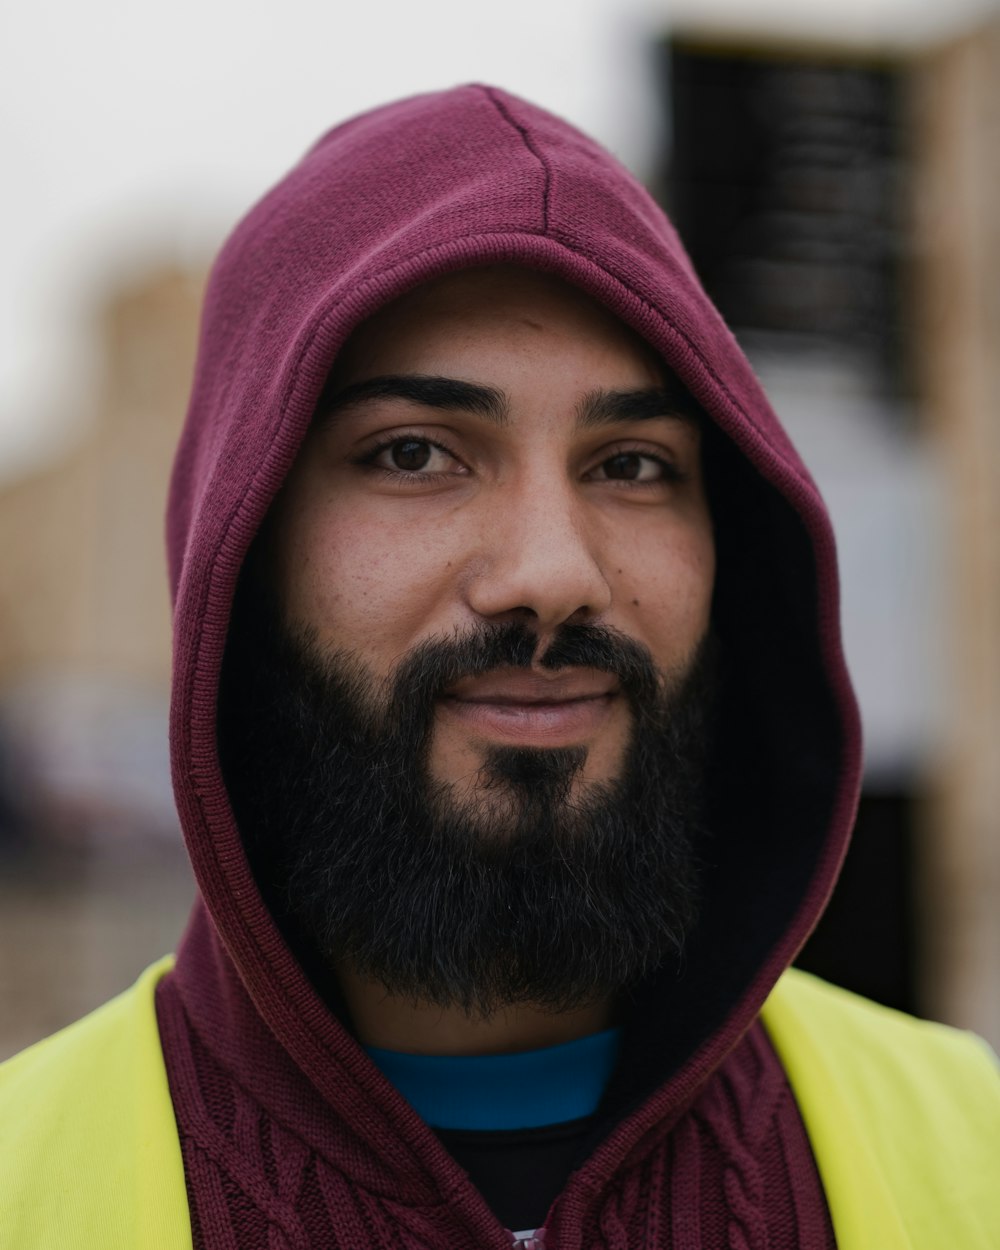 a man with a beard wearing a yellow vest